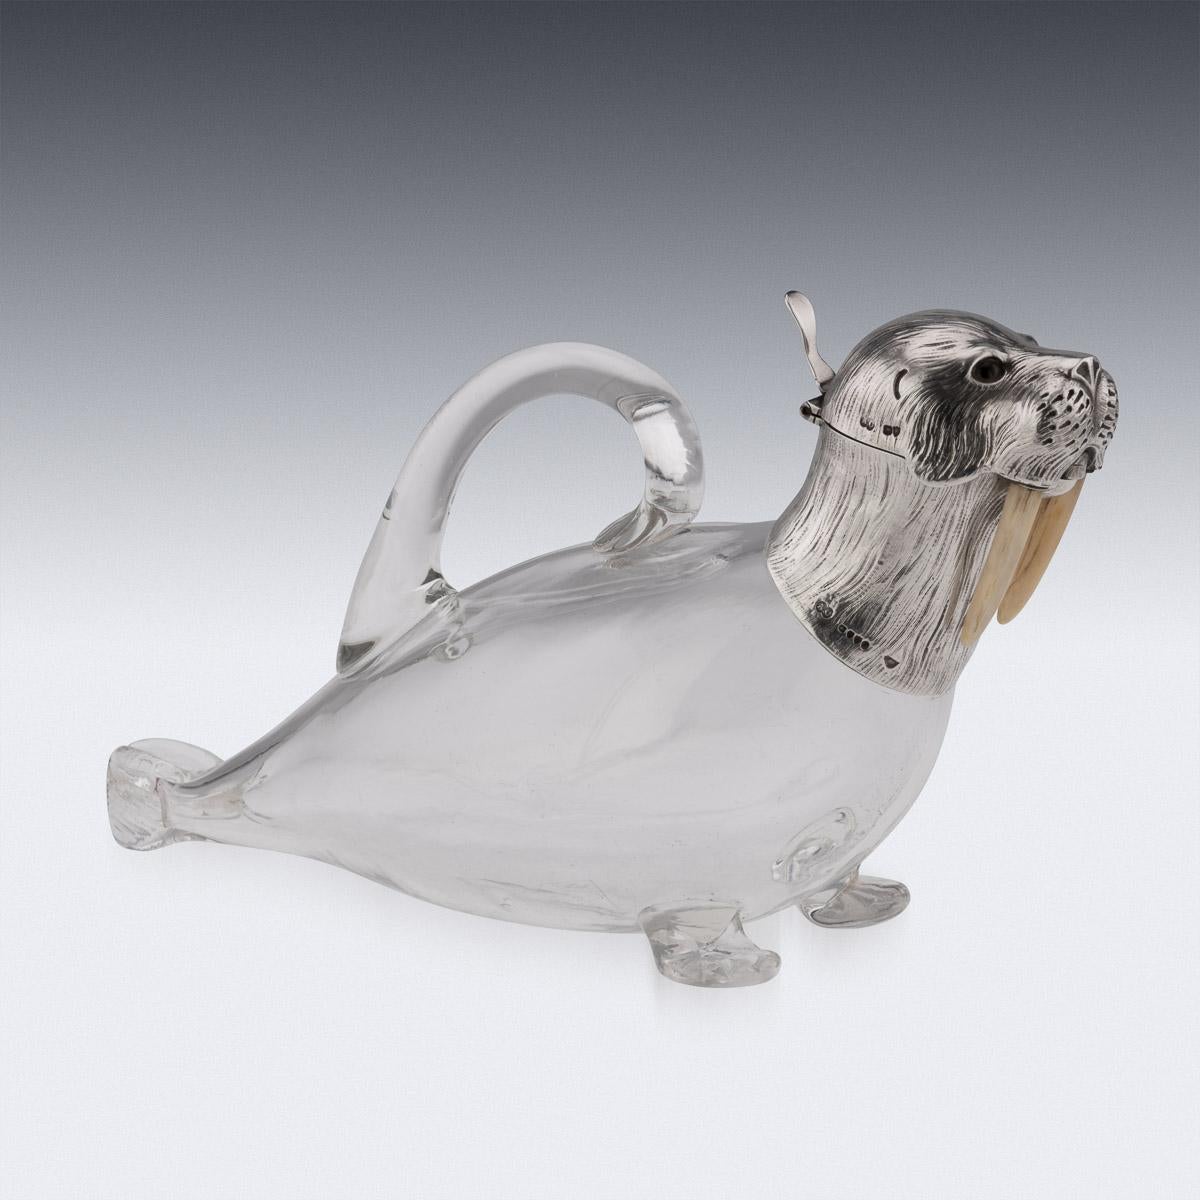 19th Century Victorian silver & glass novelty wine jug, the glass body and silver head beautifully imitating a walrus, the head made in two section with a hinged lid, a thumb-piece and mounted with glass eyes. Hallmarked English Silver (925